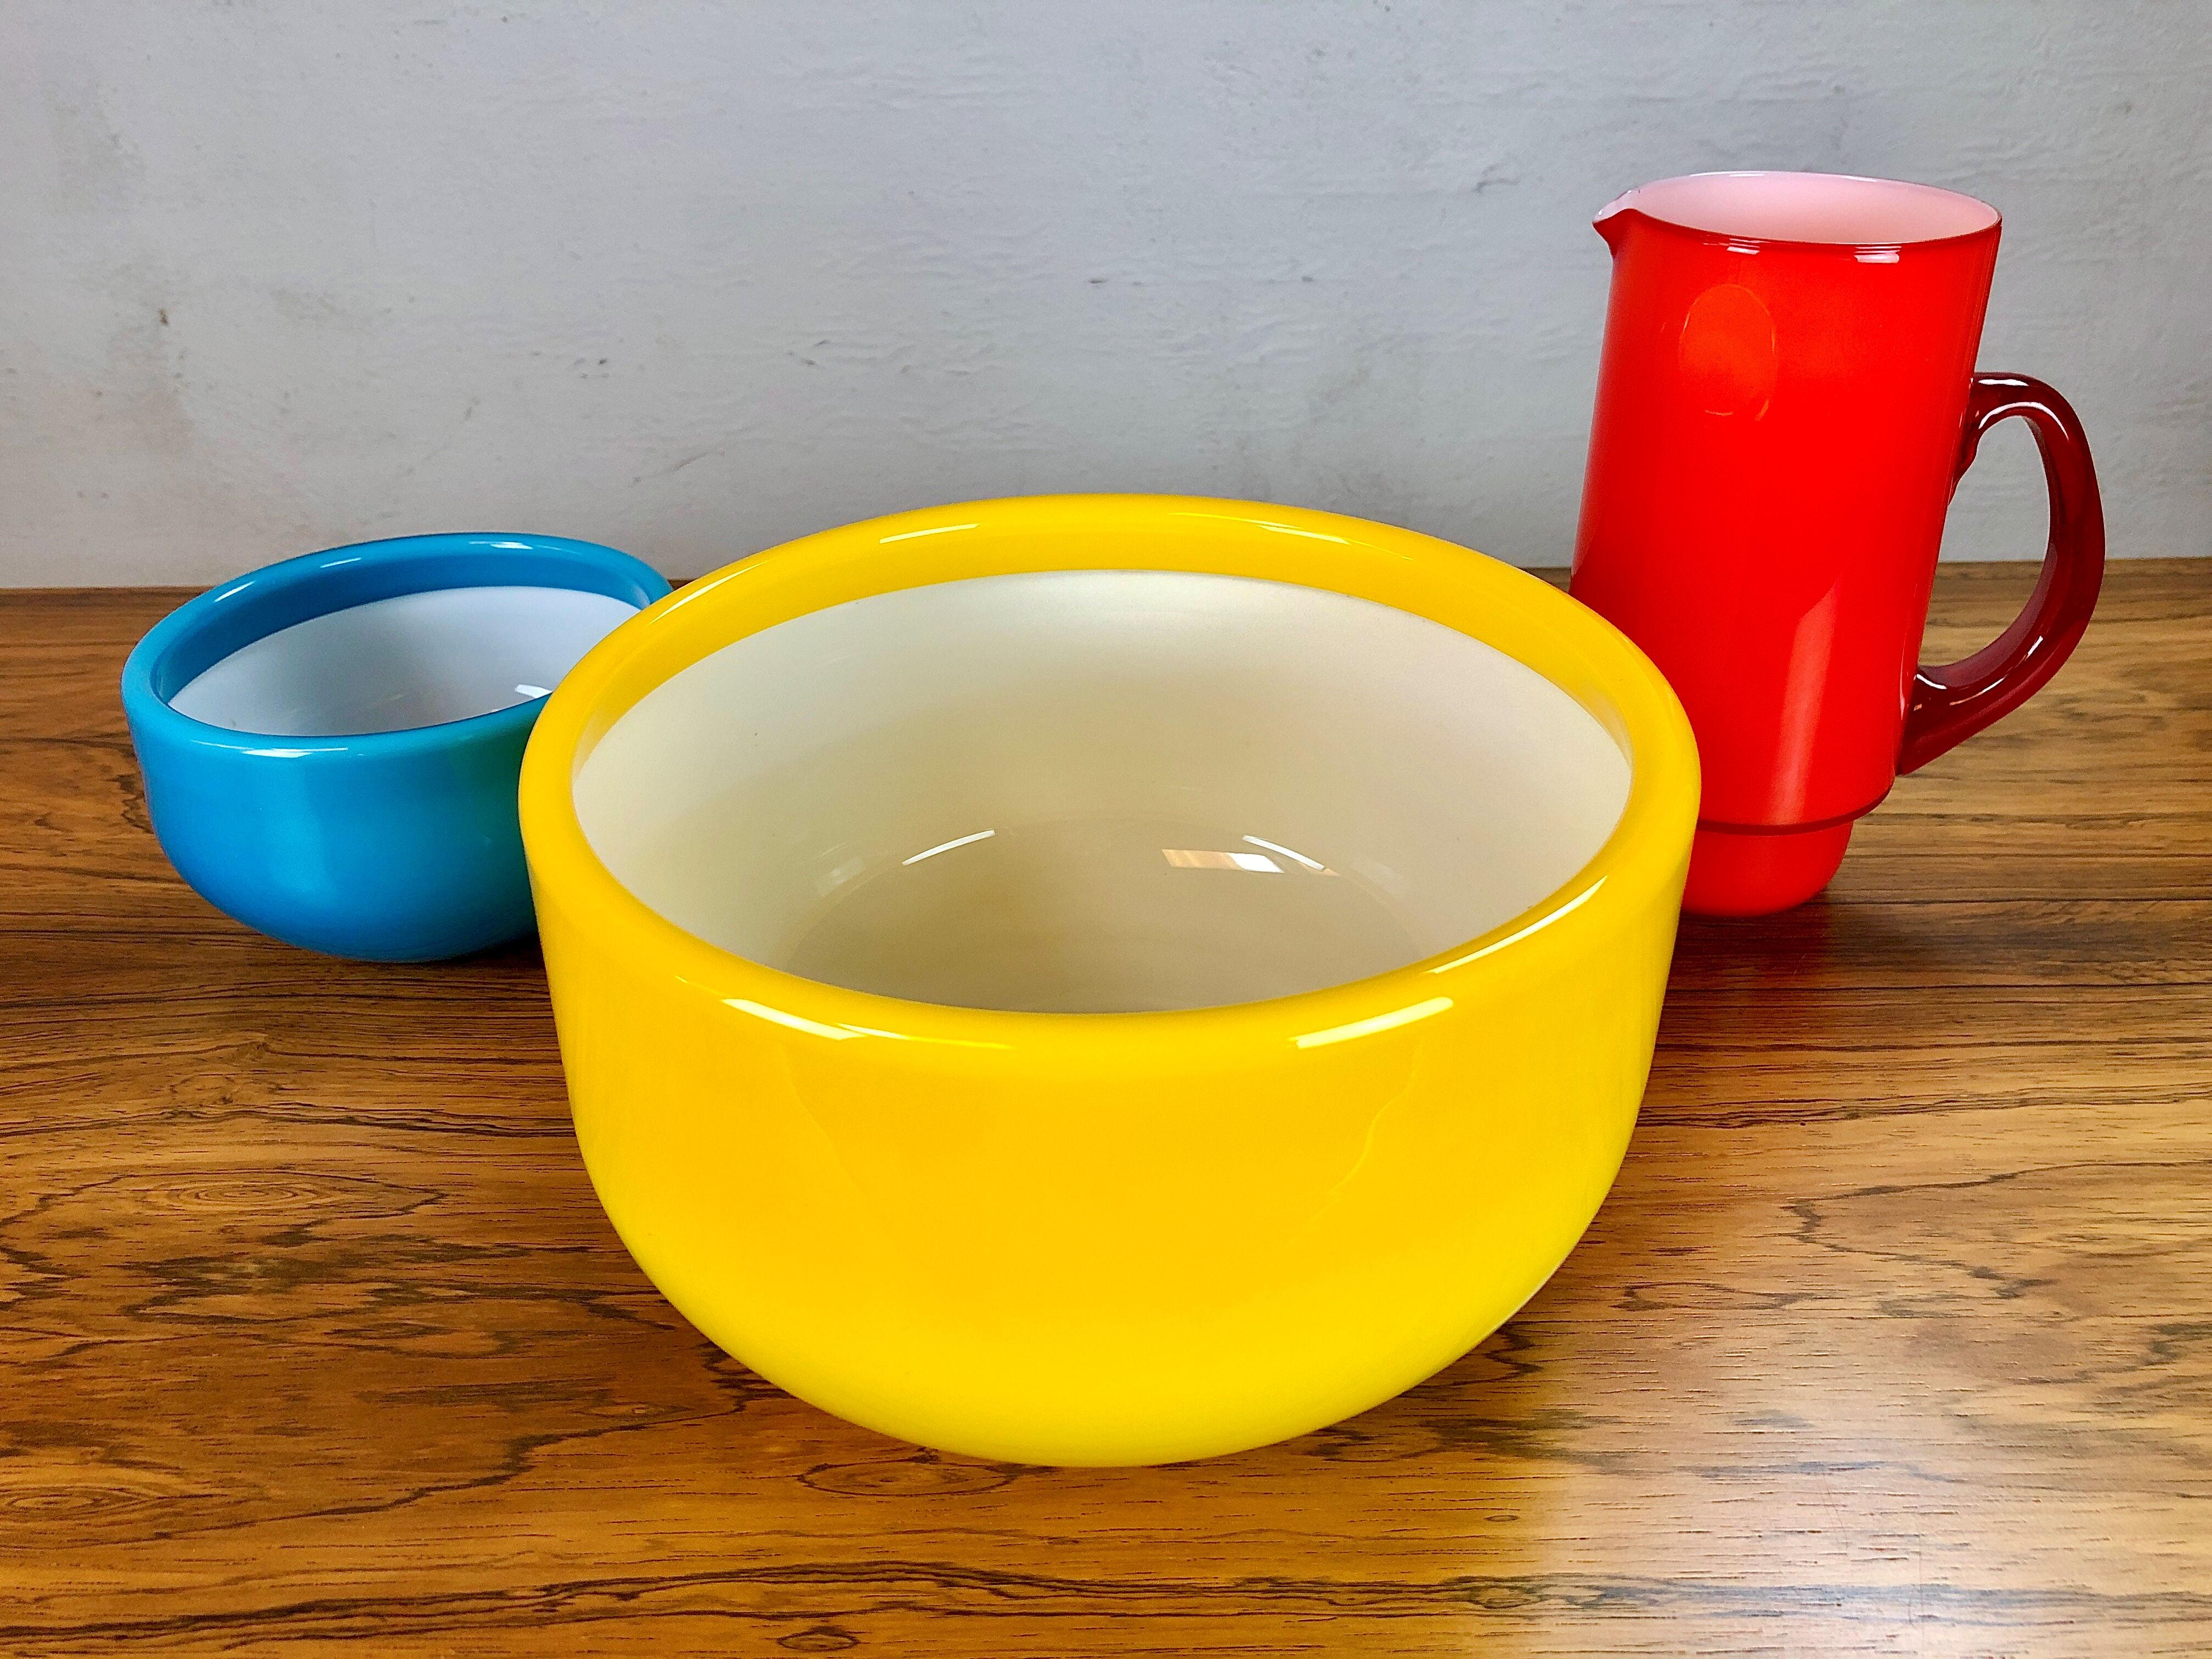 Set of pitcher and bowls in yellow, red and blue glass designed by Michael Bang and produced by Holmegaard in the 1970s.

The well designed set with it´s bright 1970´s colors in excellent condition.

Michael Bang (1942-2013) was the son of Jacob